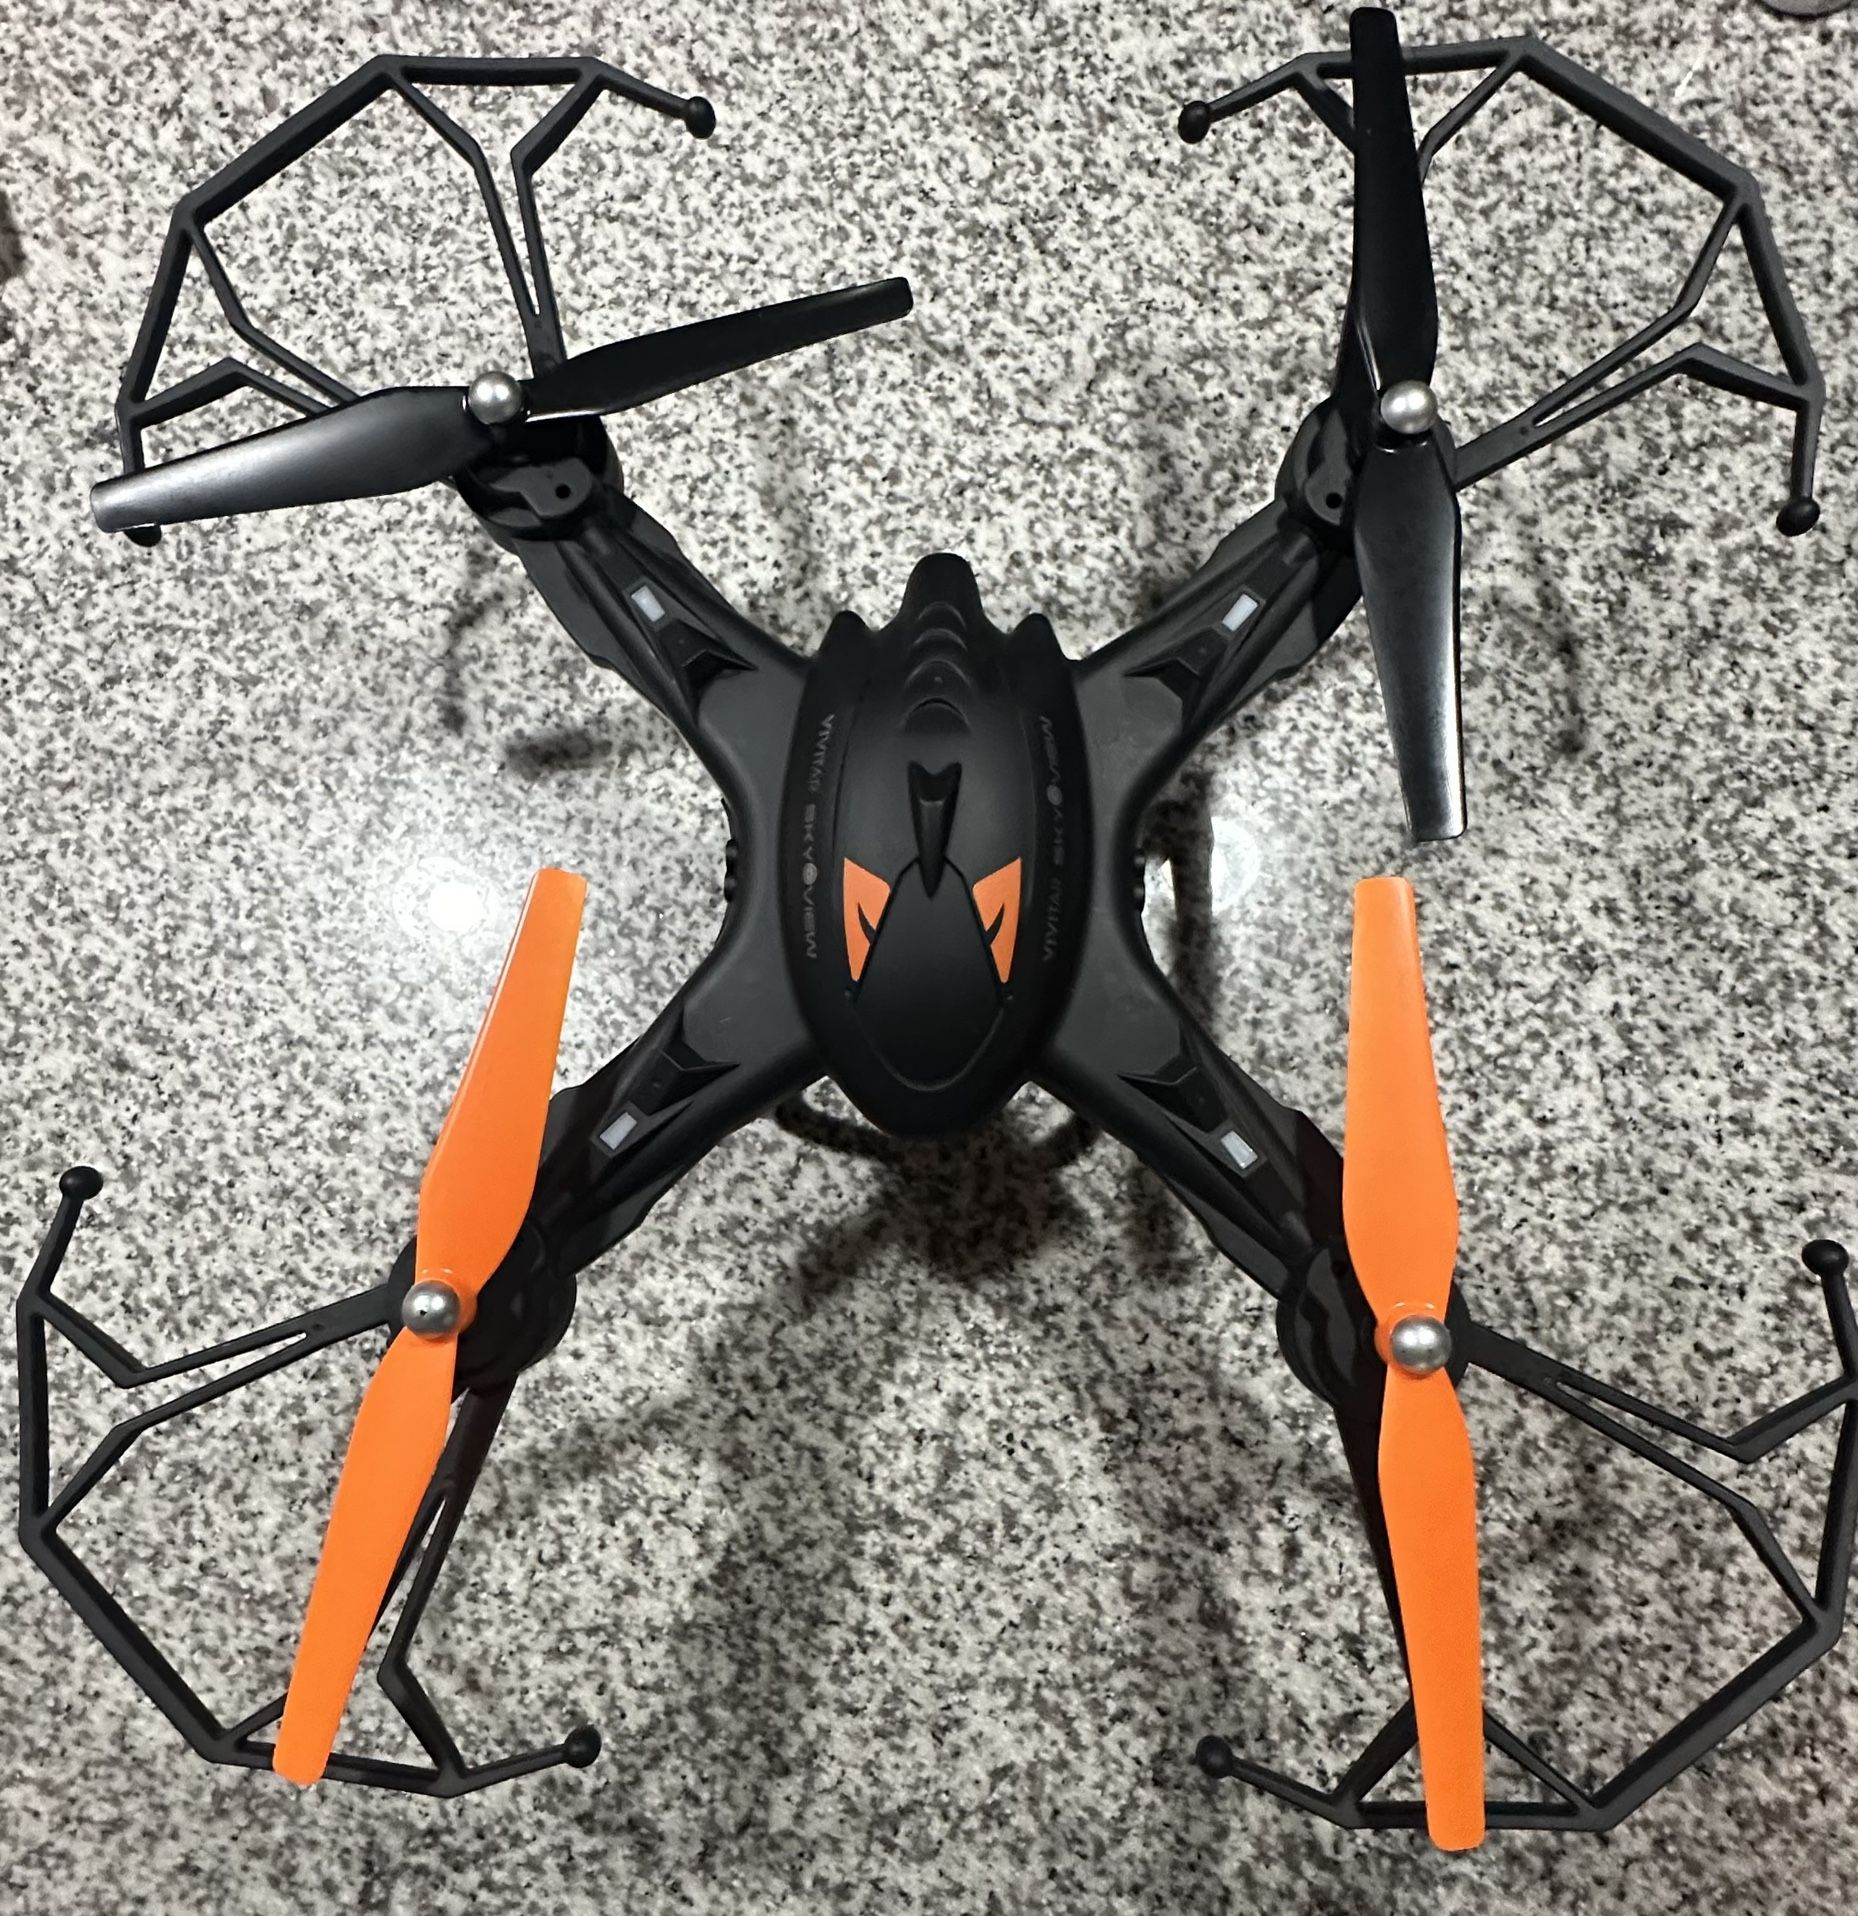 DRONE WITH 360 DEGREE CAMERA 